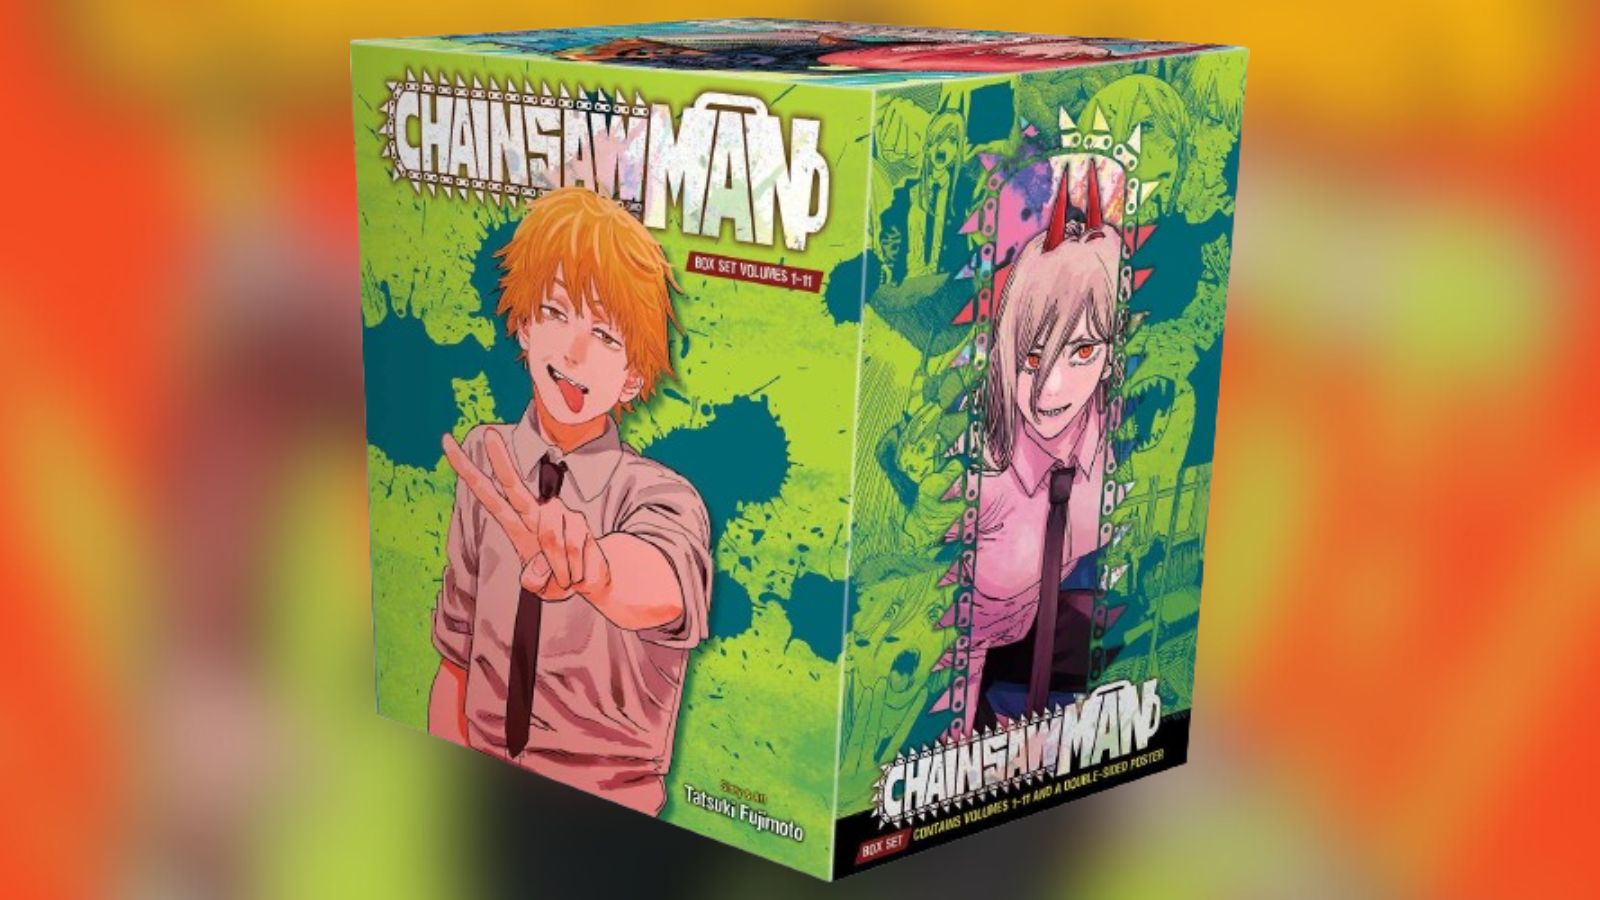 Where to start the Chainsaw Man Manga after watching Season 1 of the anime?